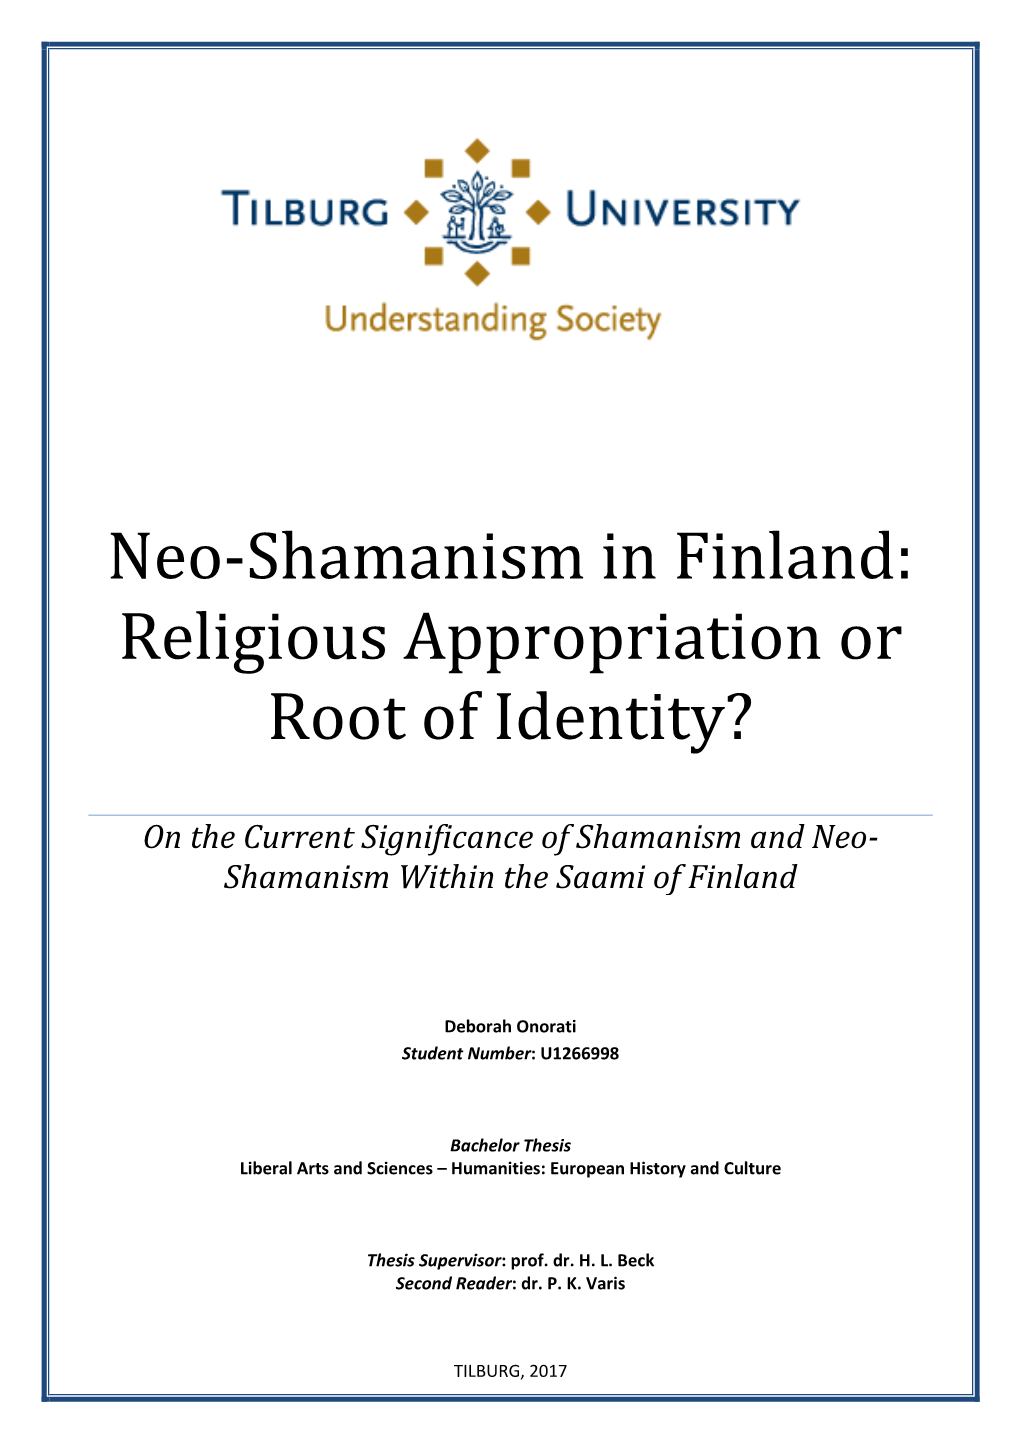 Neo-Shamanism in Finland: Religious Appropriation Or Root of Identity?